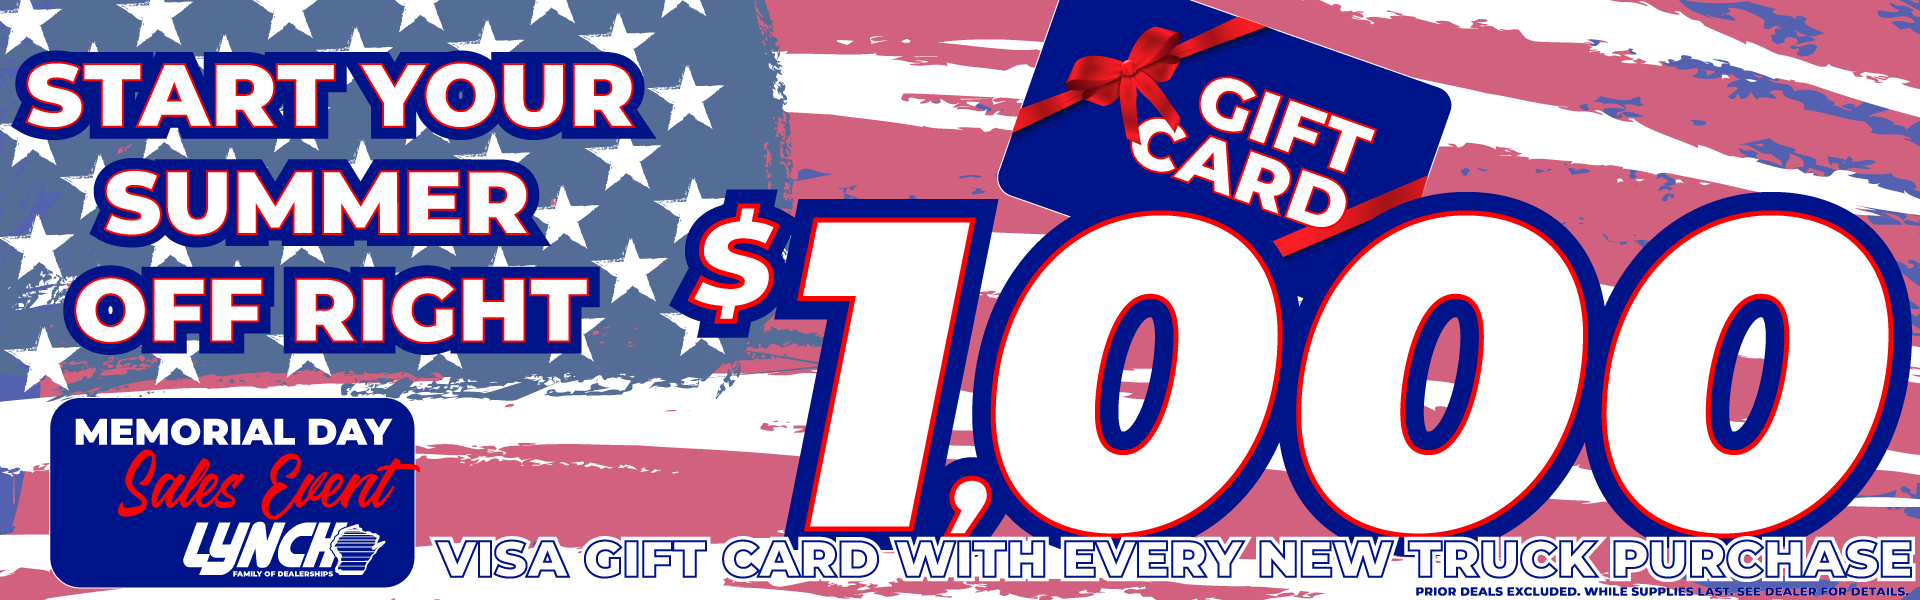 $1000 Visa Gift card Giveaway with purchase of any new truck